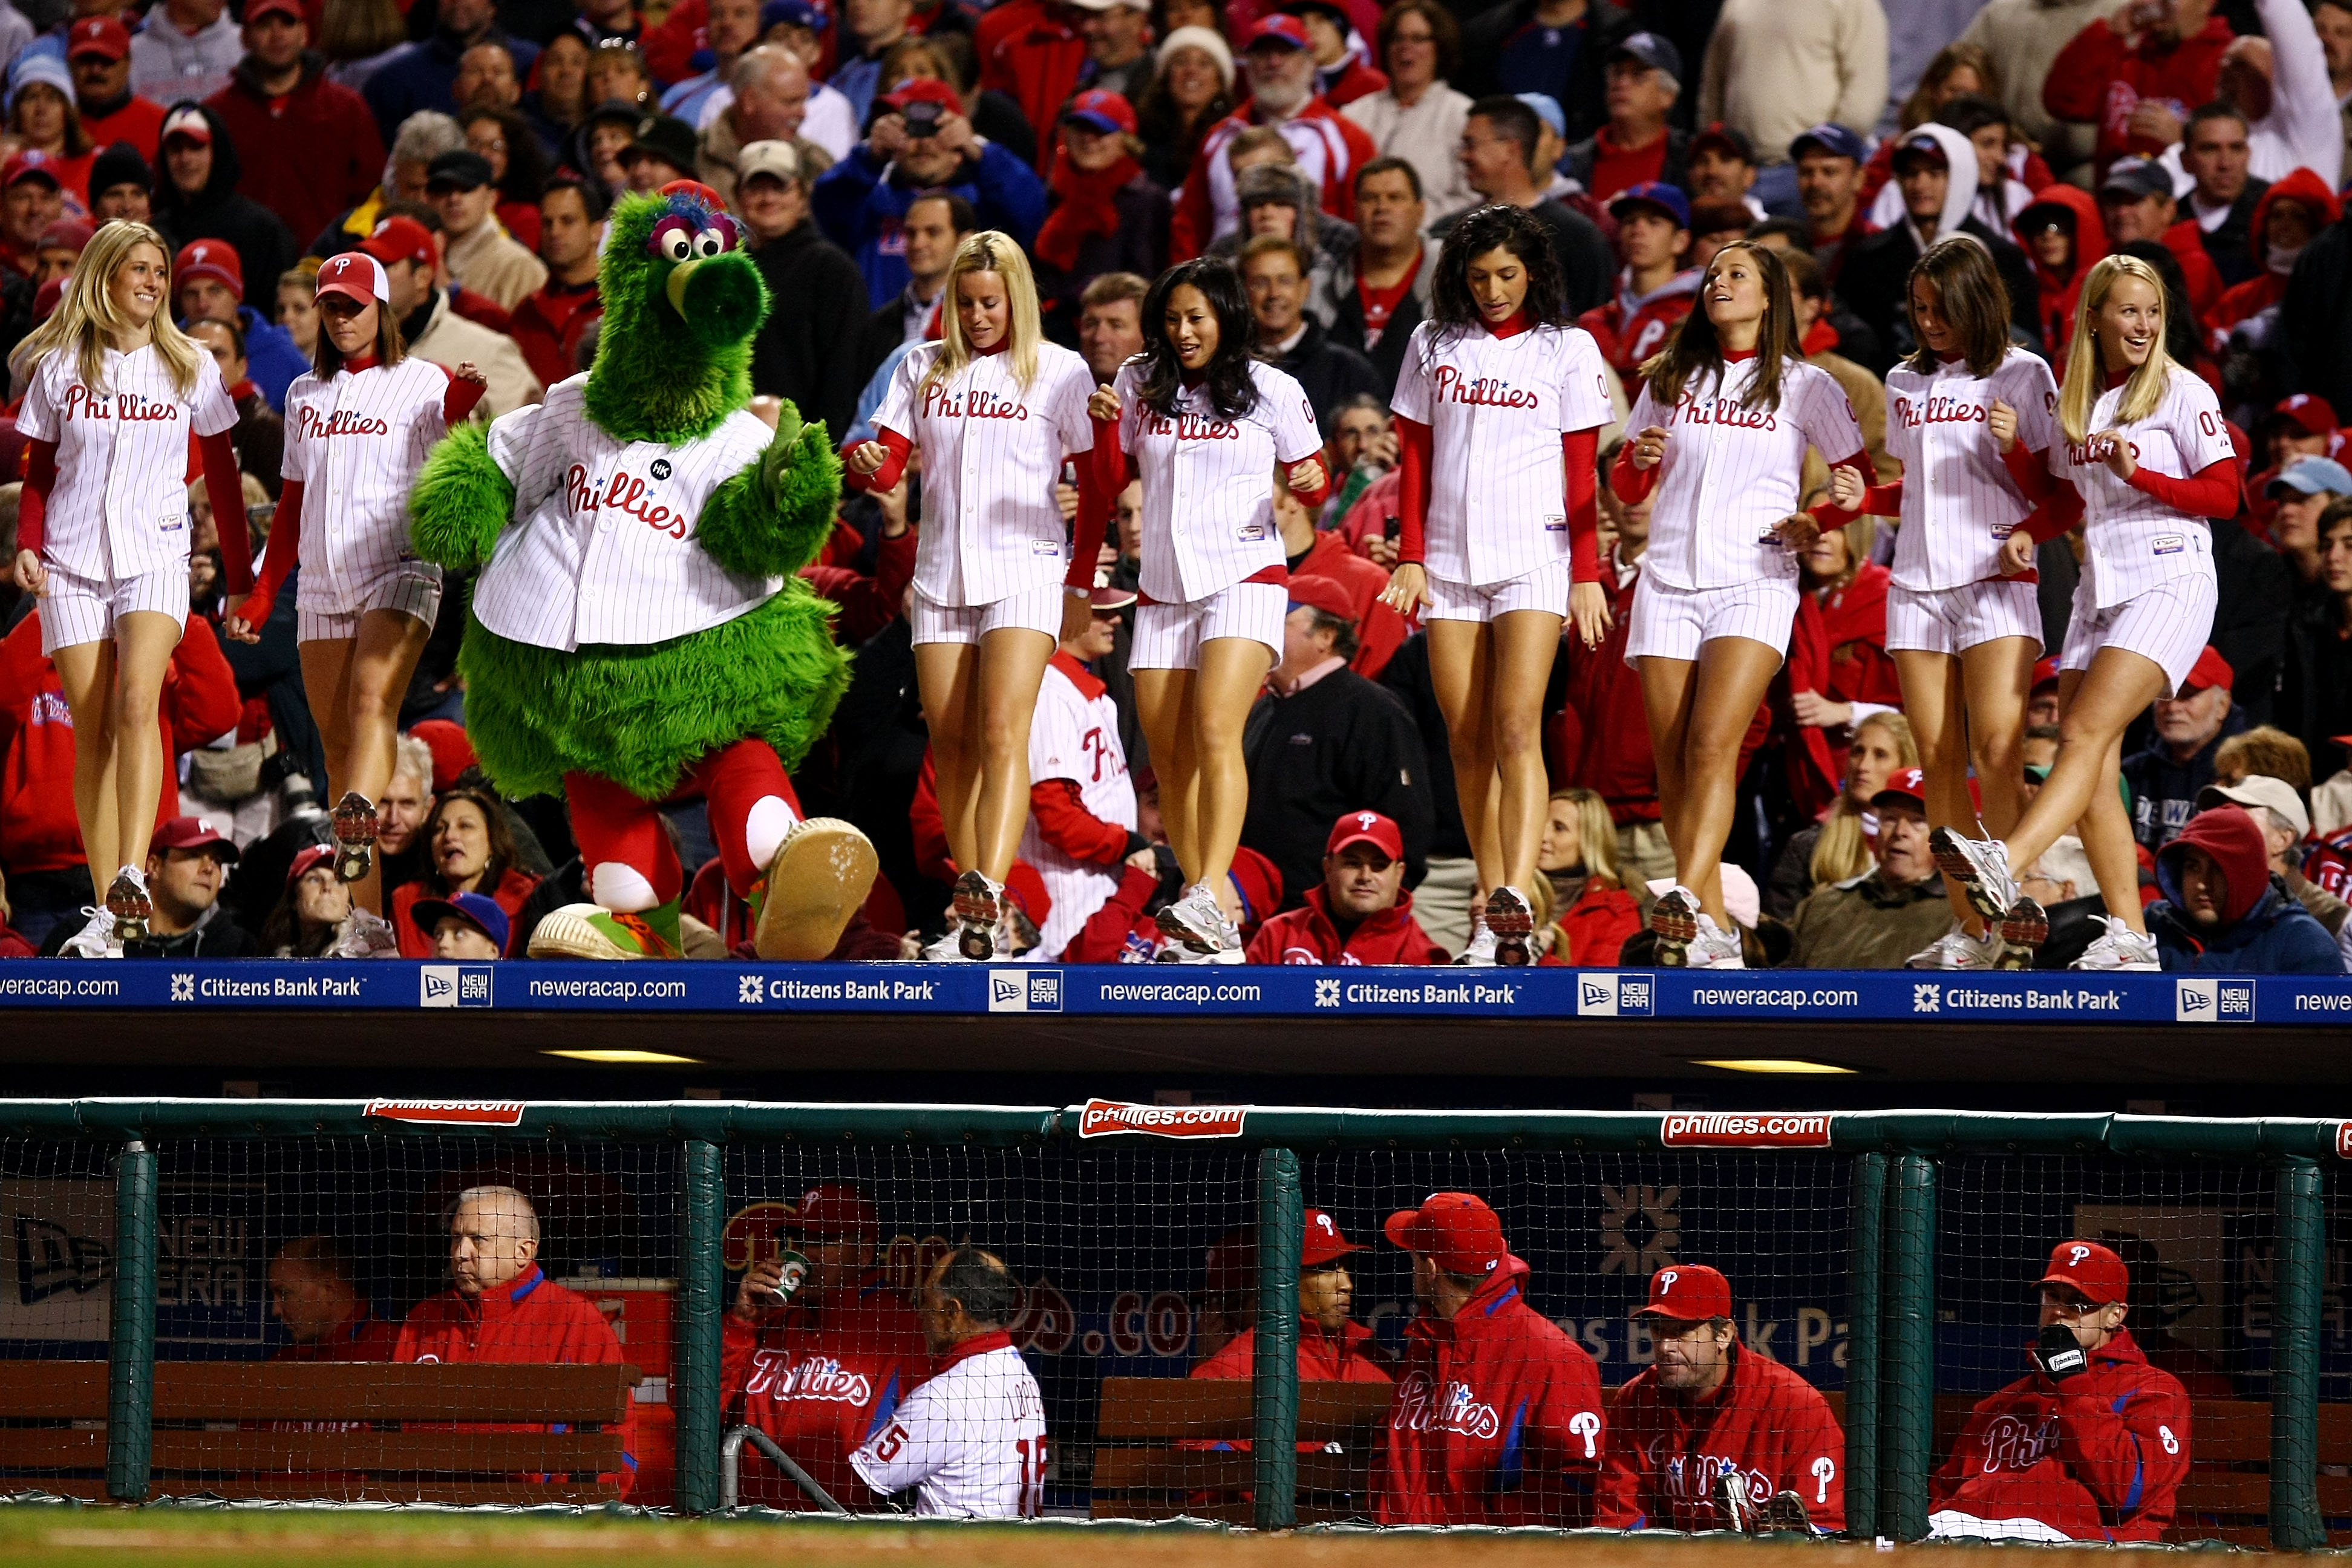 PHILADELPHIA - OCTOBER 19:  The Philly Phanatic, mascot for the Philadelphia Phillies performs on top of the Phillies dugout against the Los Angeles Dodgers in Game Four of the NLCS during the 2009 MLB Playoffs at Citizens Bank Park on October 19, 2009 in